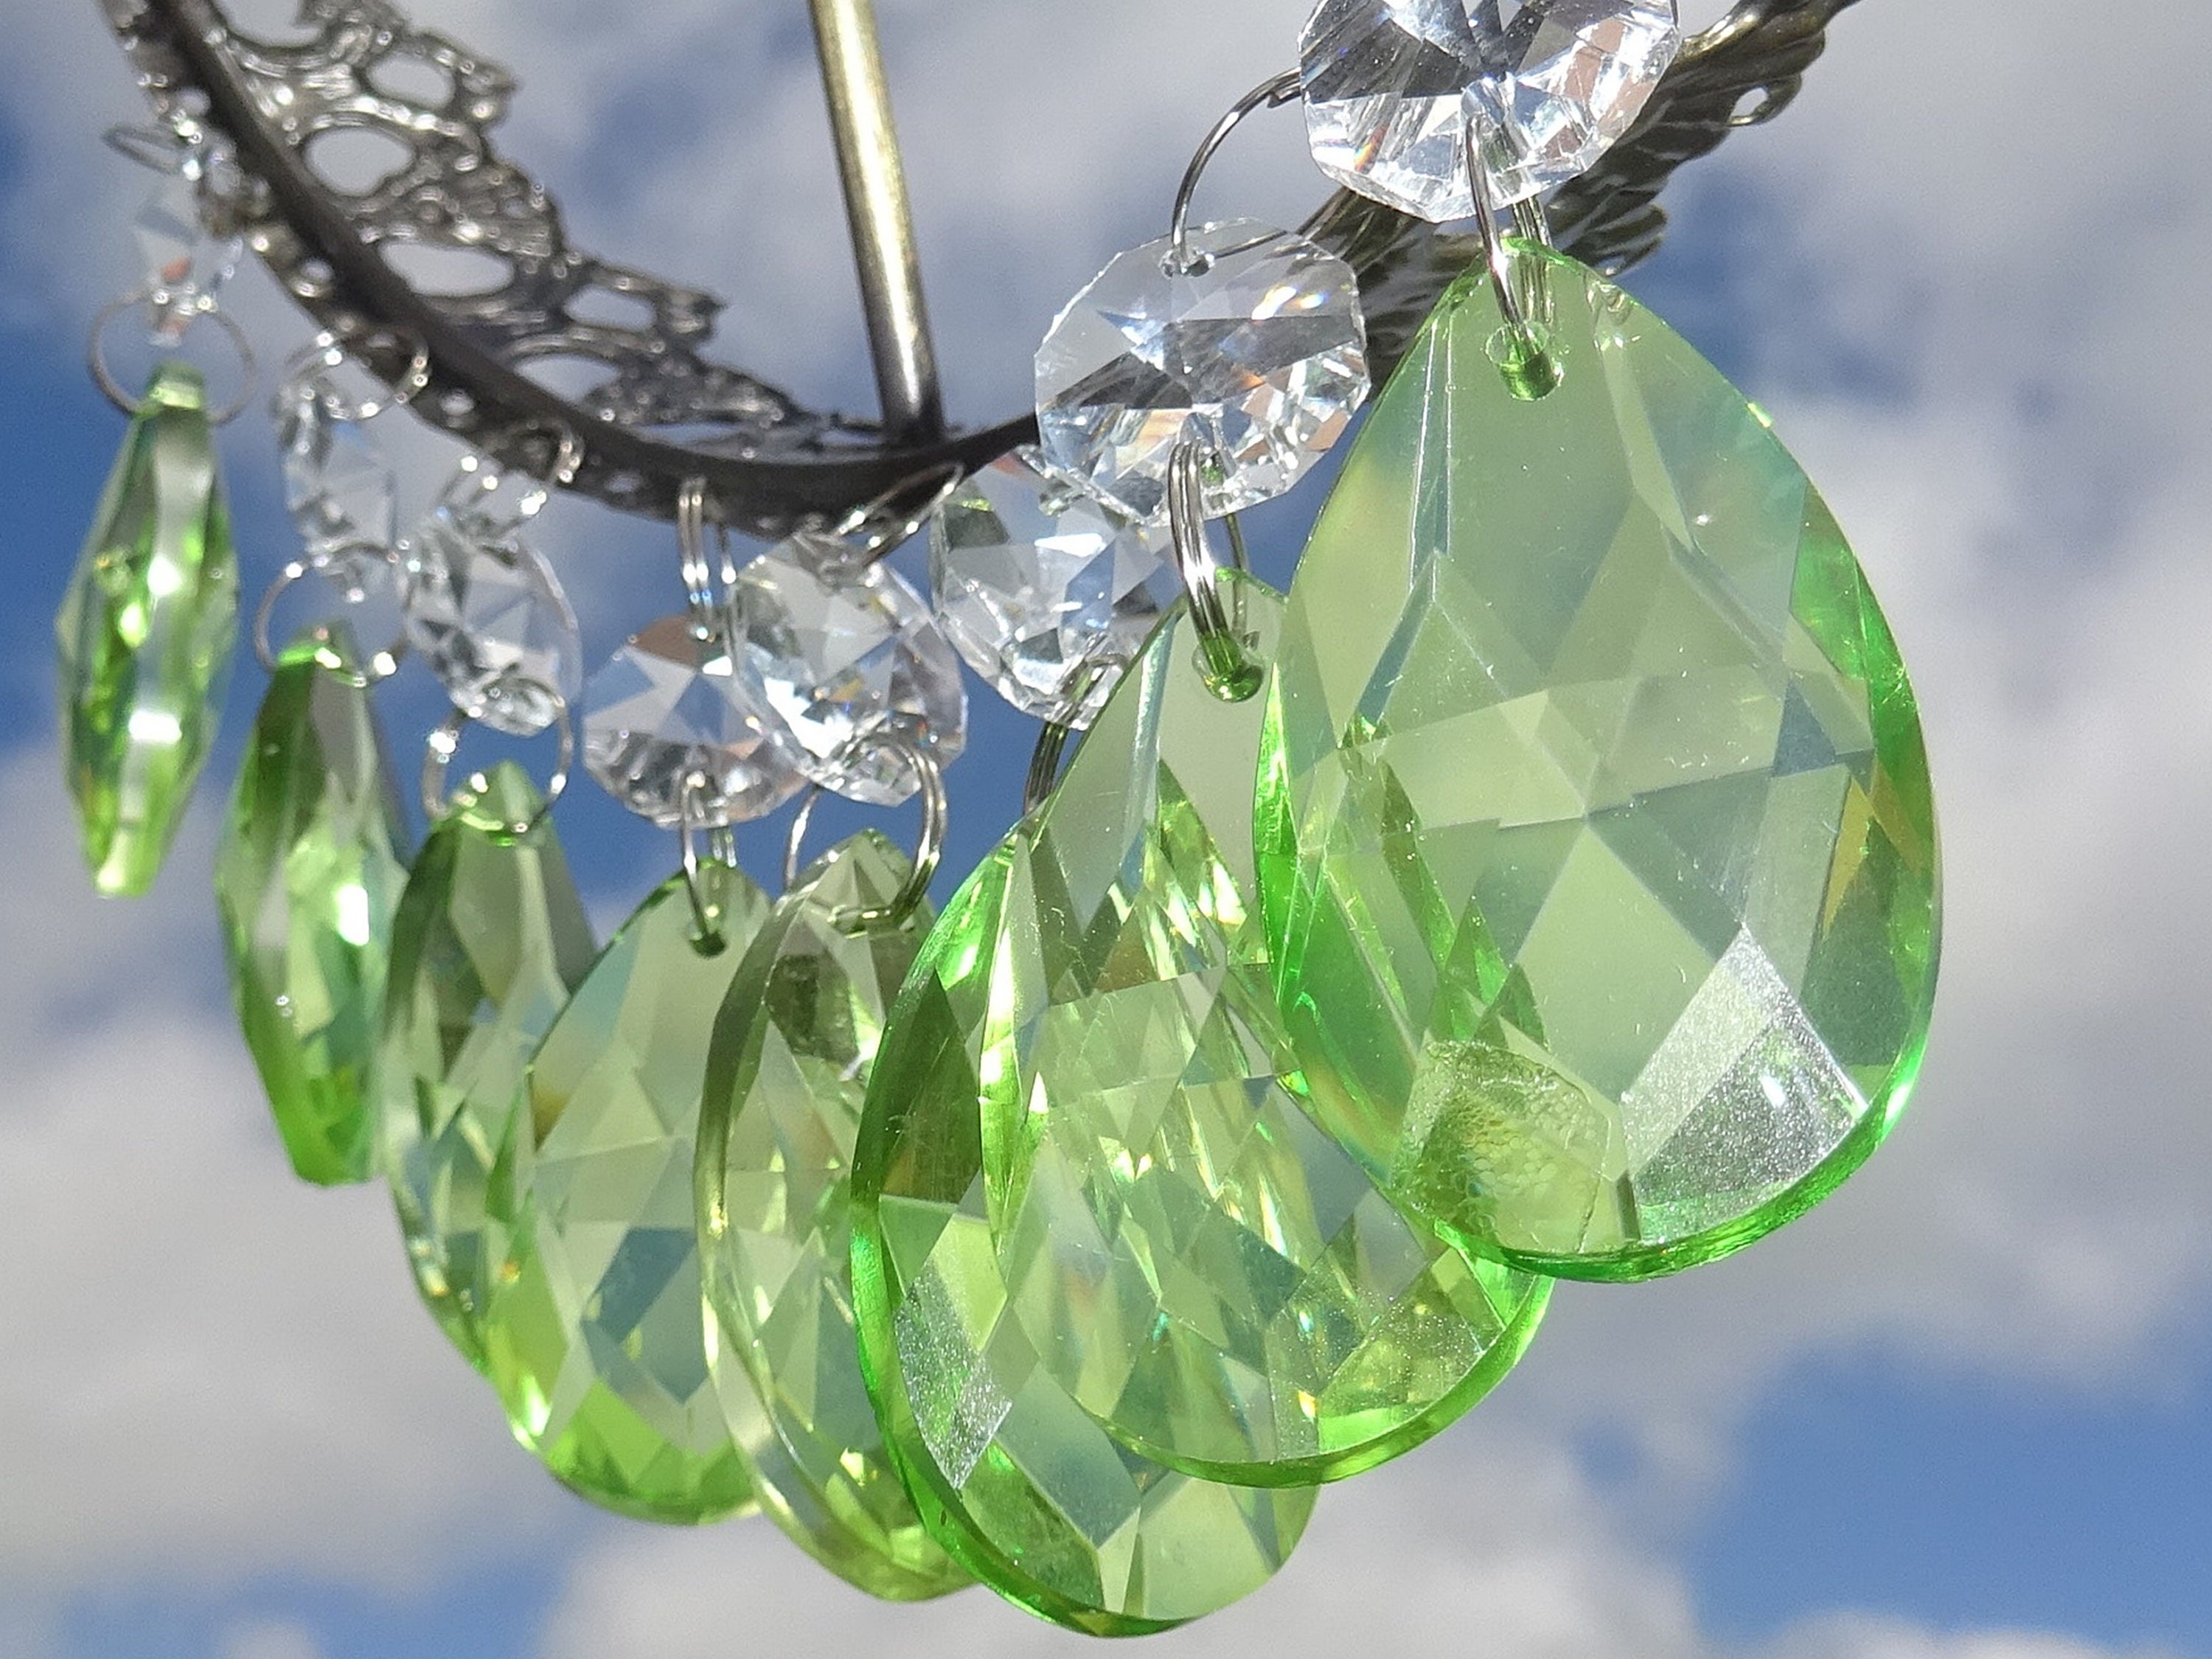 10 CHANDELIER CUT GLASS CRYSTALS DROPLETS ANTIQUE GREEN OVAL LIGHT SPARE DROPS 